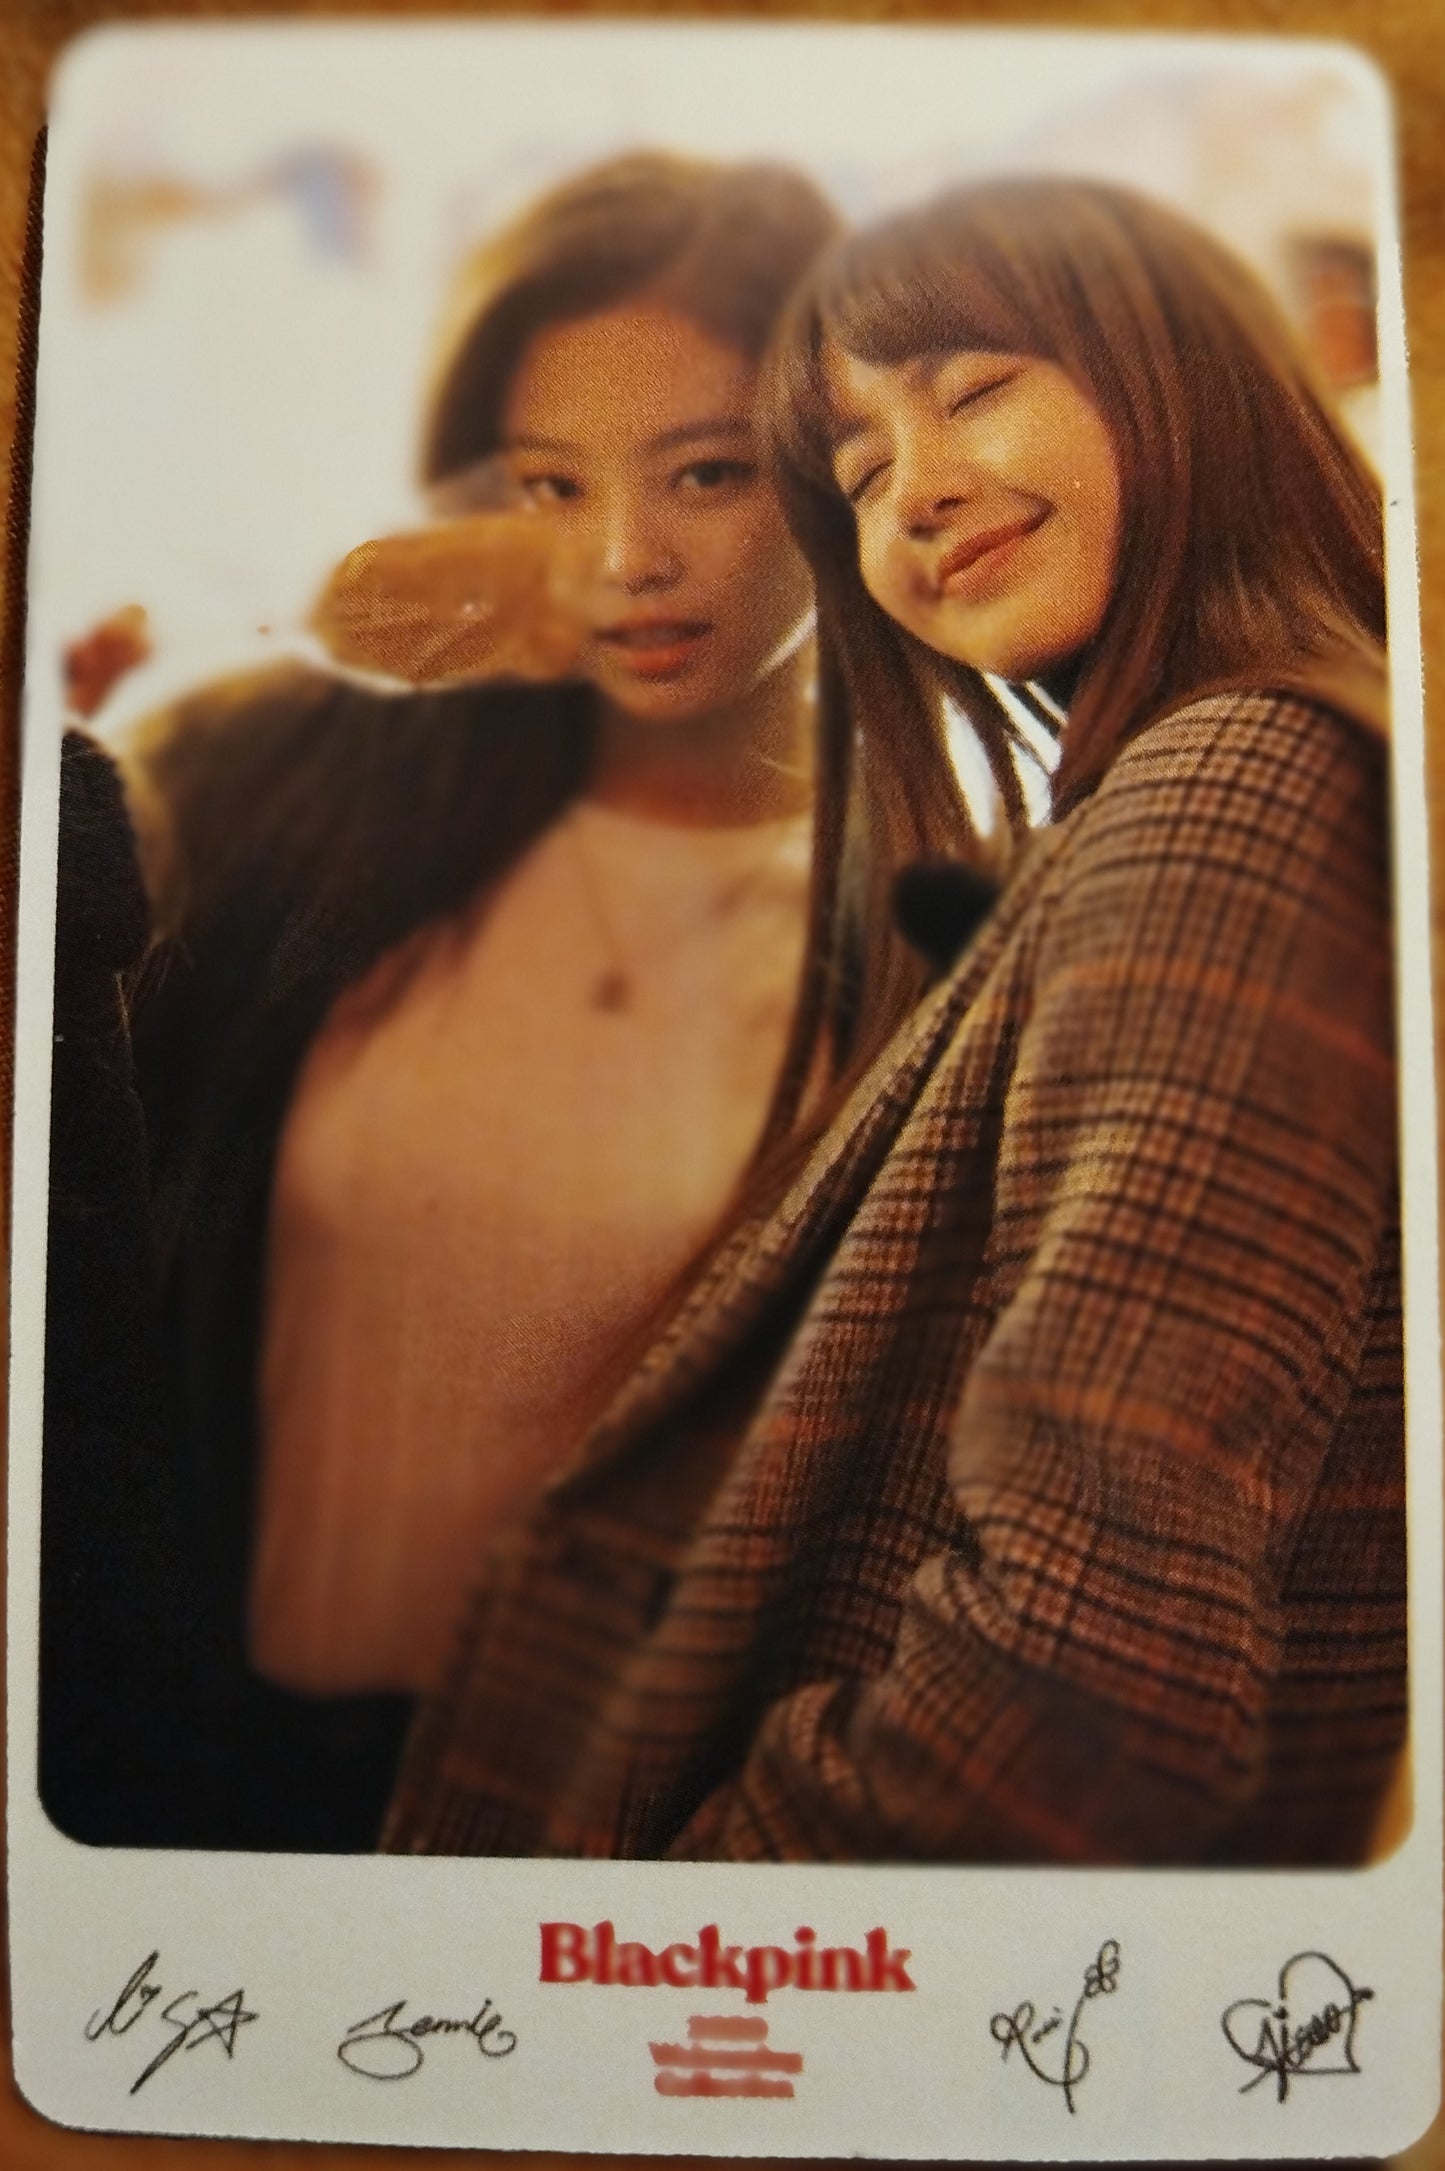 Photocard  BLACKPINK  2020 welcoming collection  Jennie  Lisa